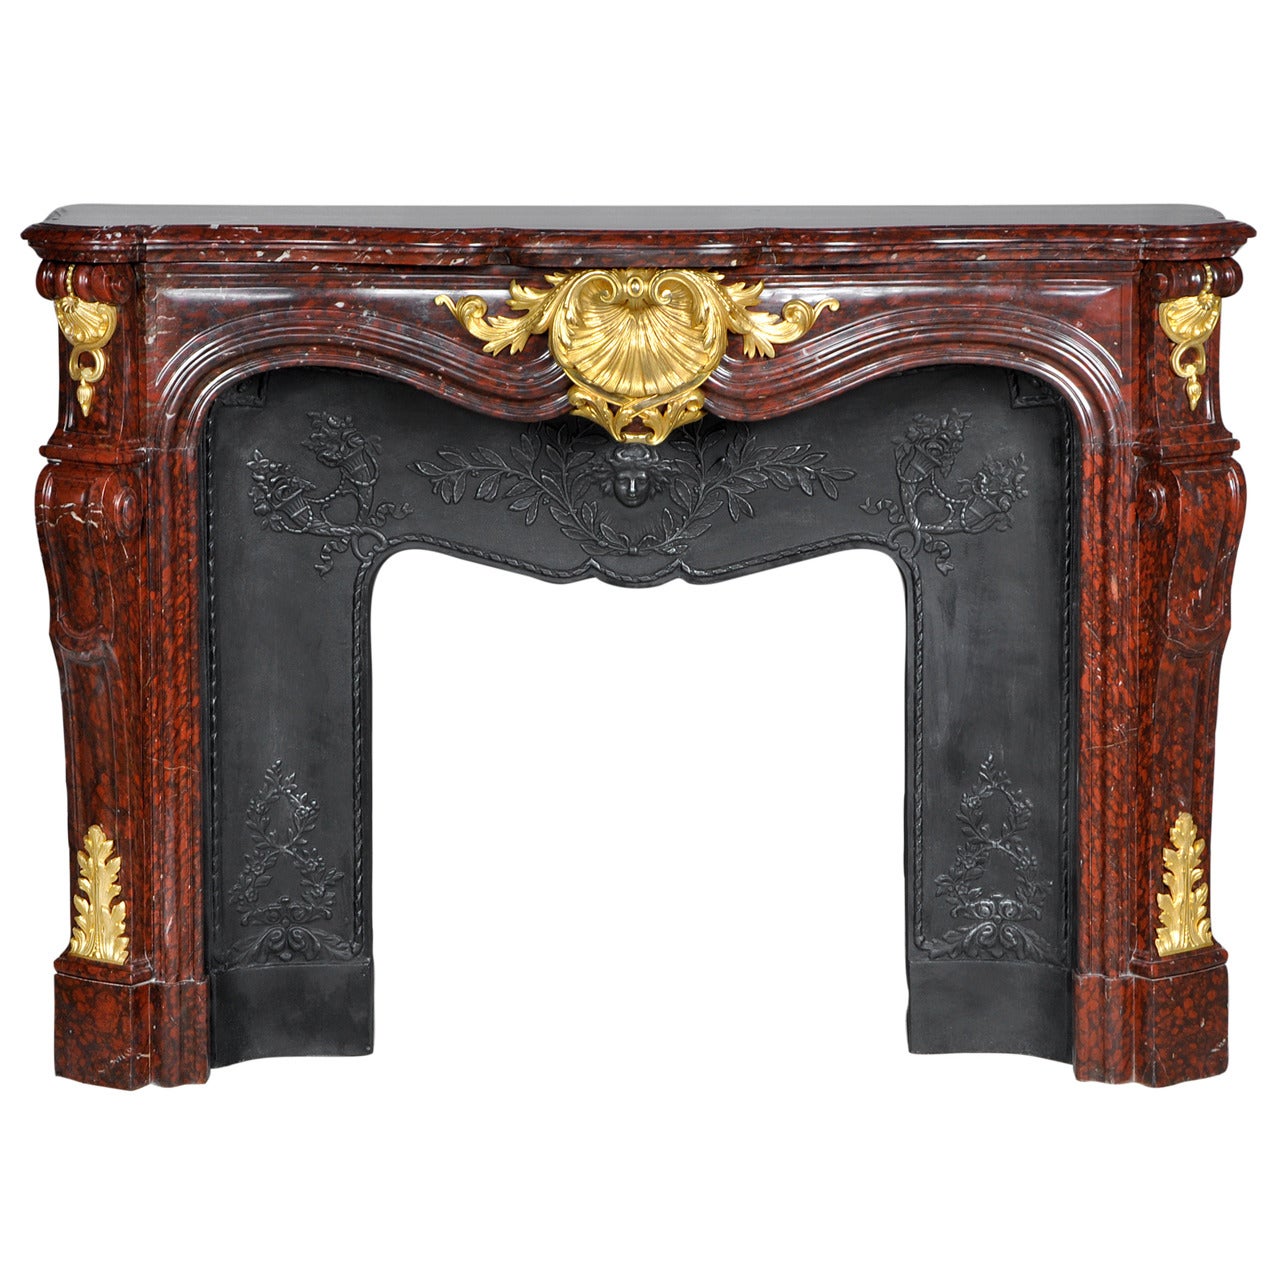 Beautiful Louis XV Style Fireplace of Red Griotte Marble with Bronze Ornaments